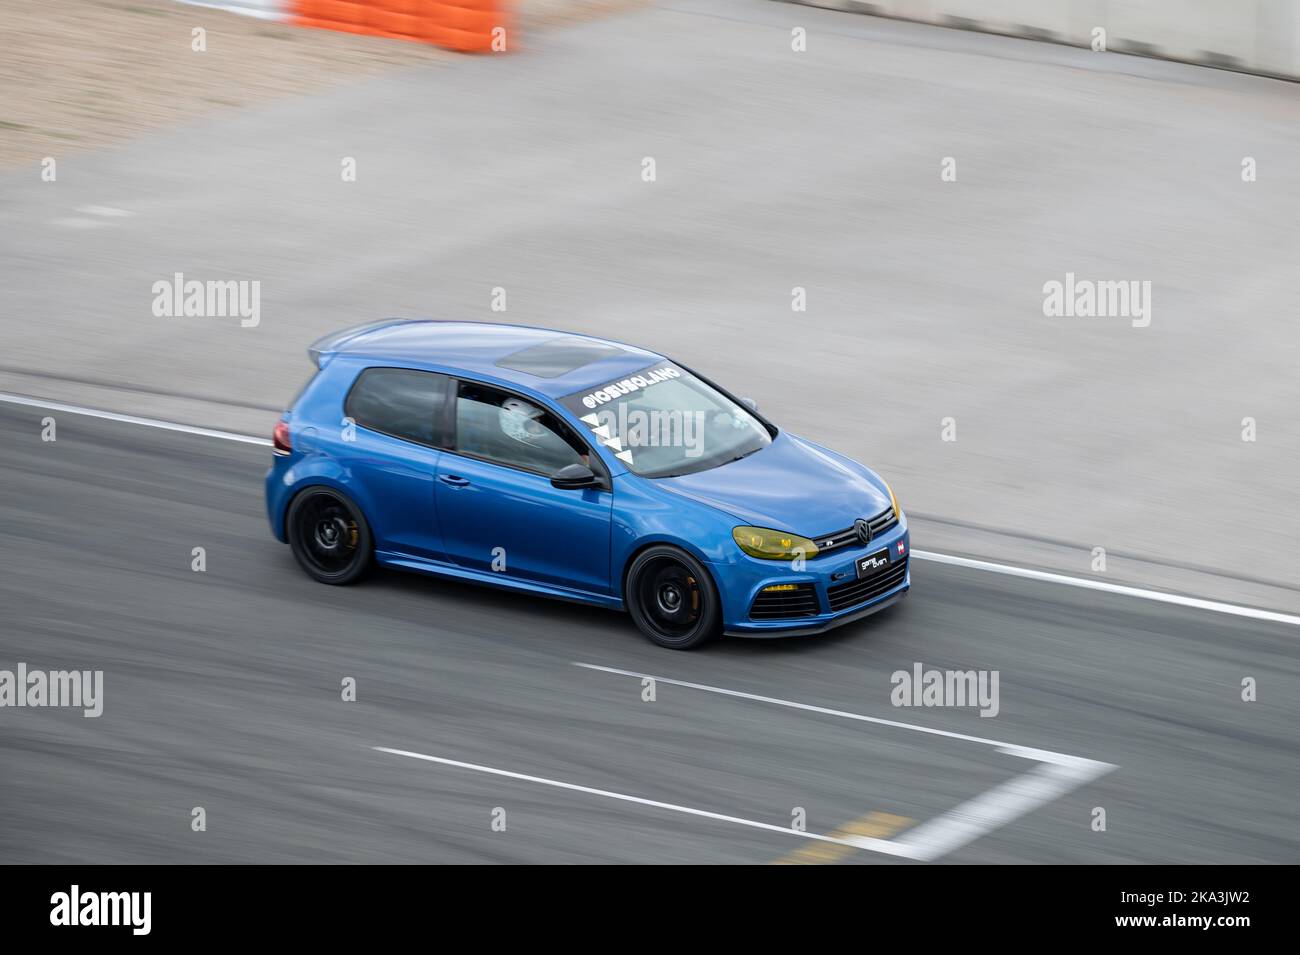 Sixth generation Volkswagen Golf R GTI on the race track Stock Photo